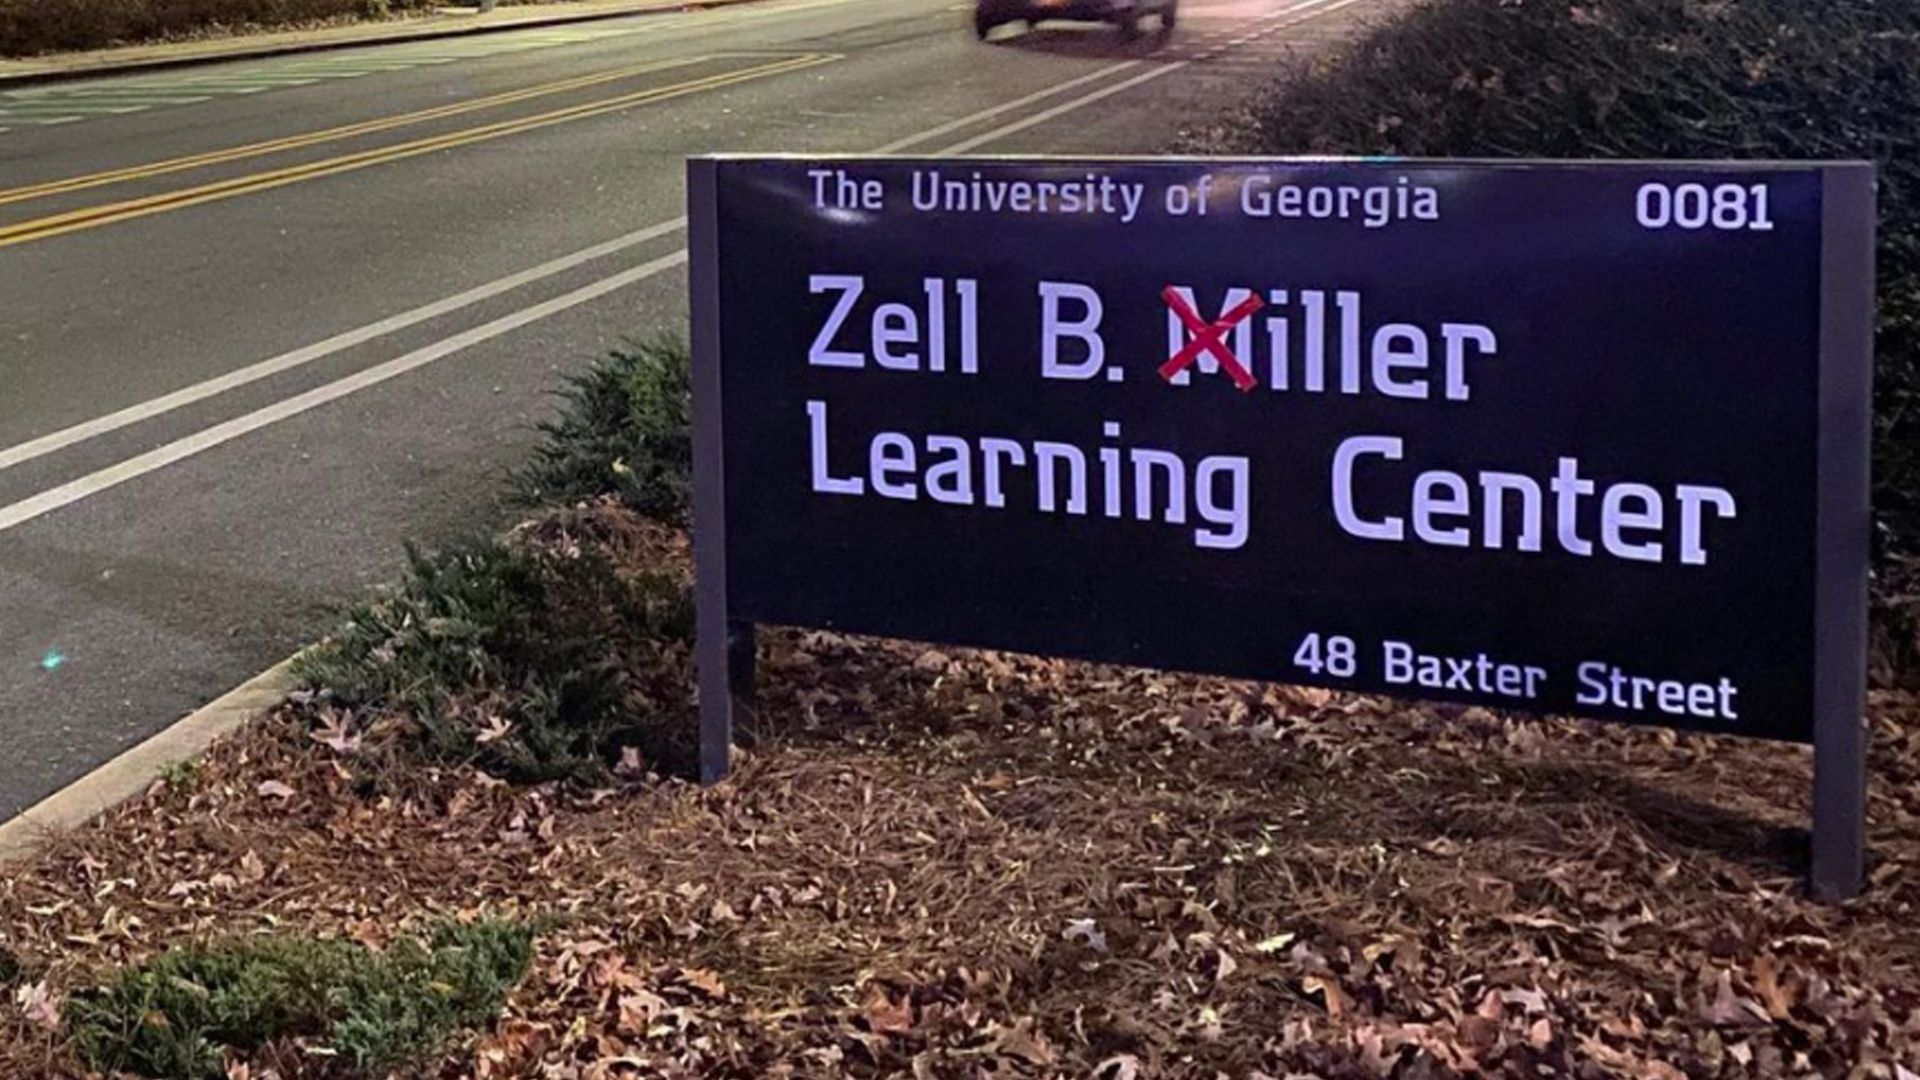 A sign for the Zell B. Miller Learning Center on the University of Georgia campus has the "M" in Miller crossed out with a red tape "X"